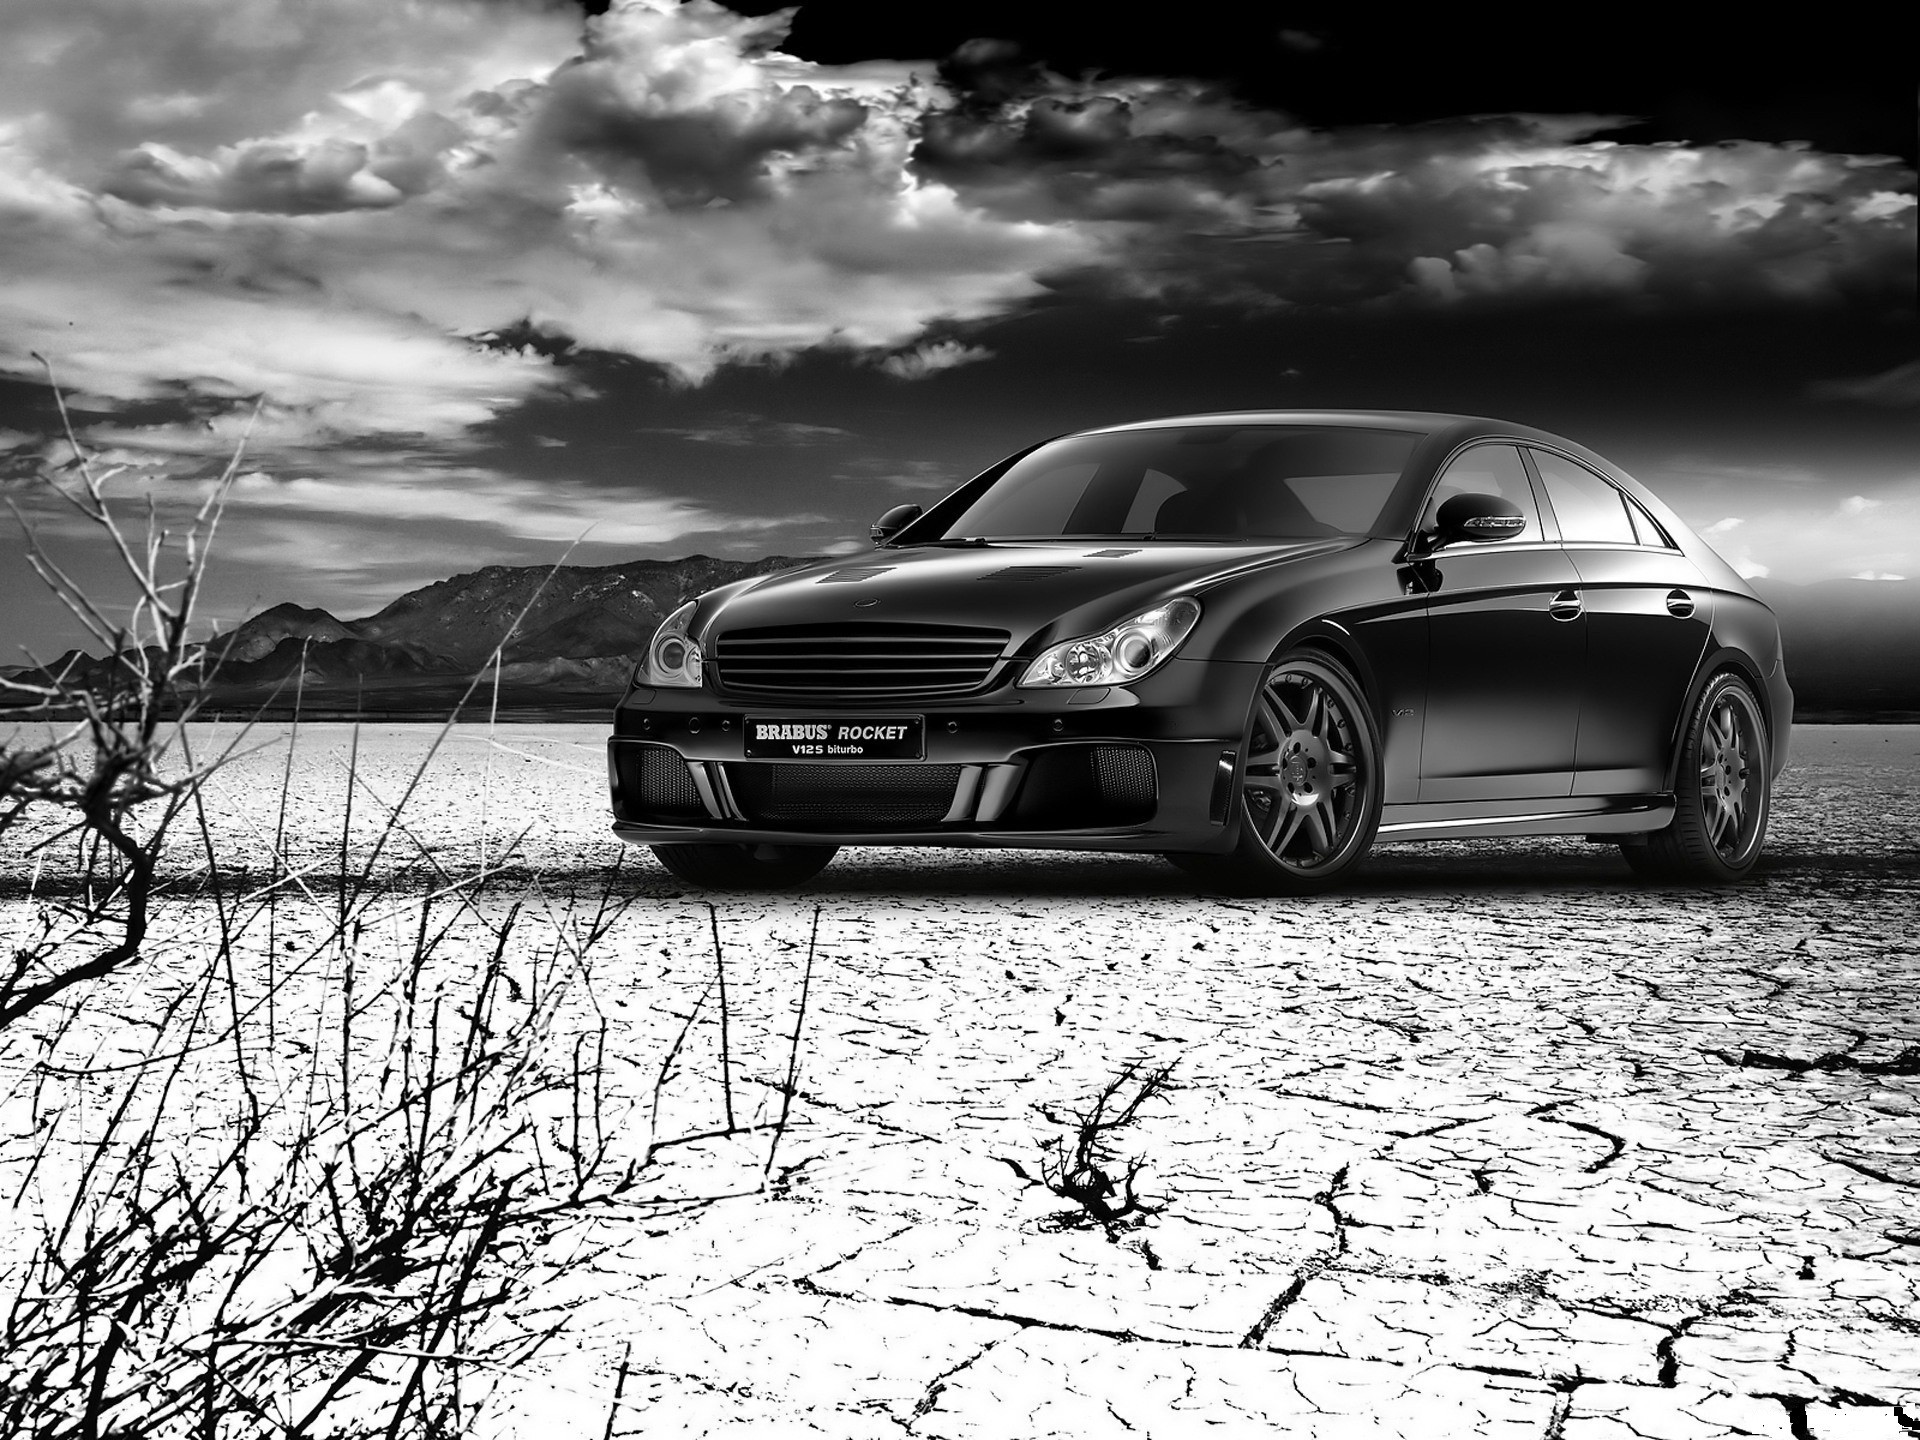 clouds, Cars, Rockets, Monochrome, Greyscale, Mercedes benz Wallpaper